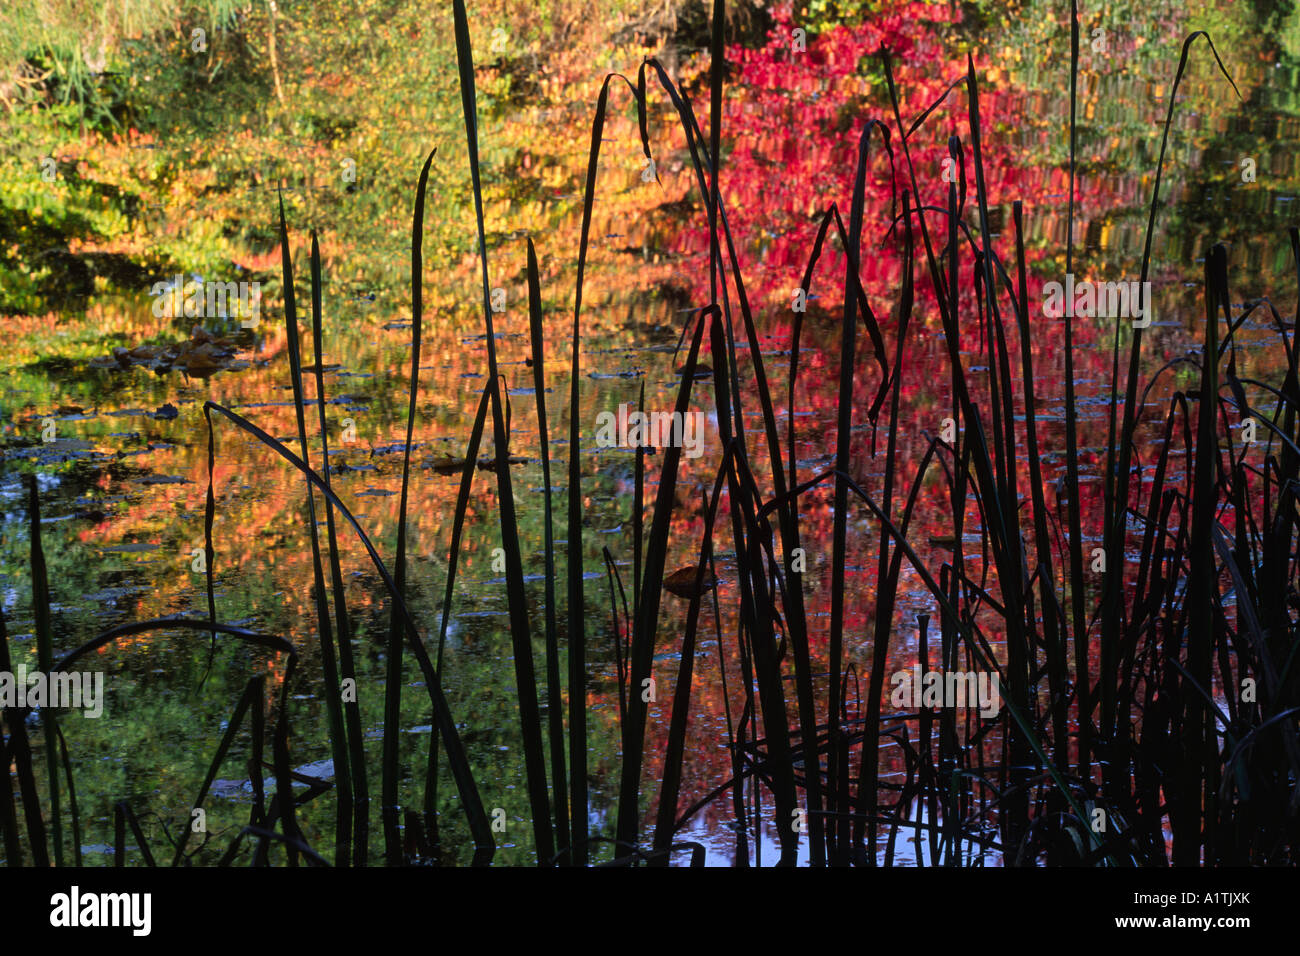 Autumnal reflections in a garden lake with silhouettes of Bulrushes. Glansevern Gardens, Powys, Wales, UK. Stock Photo